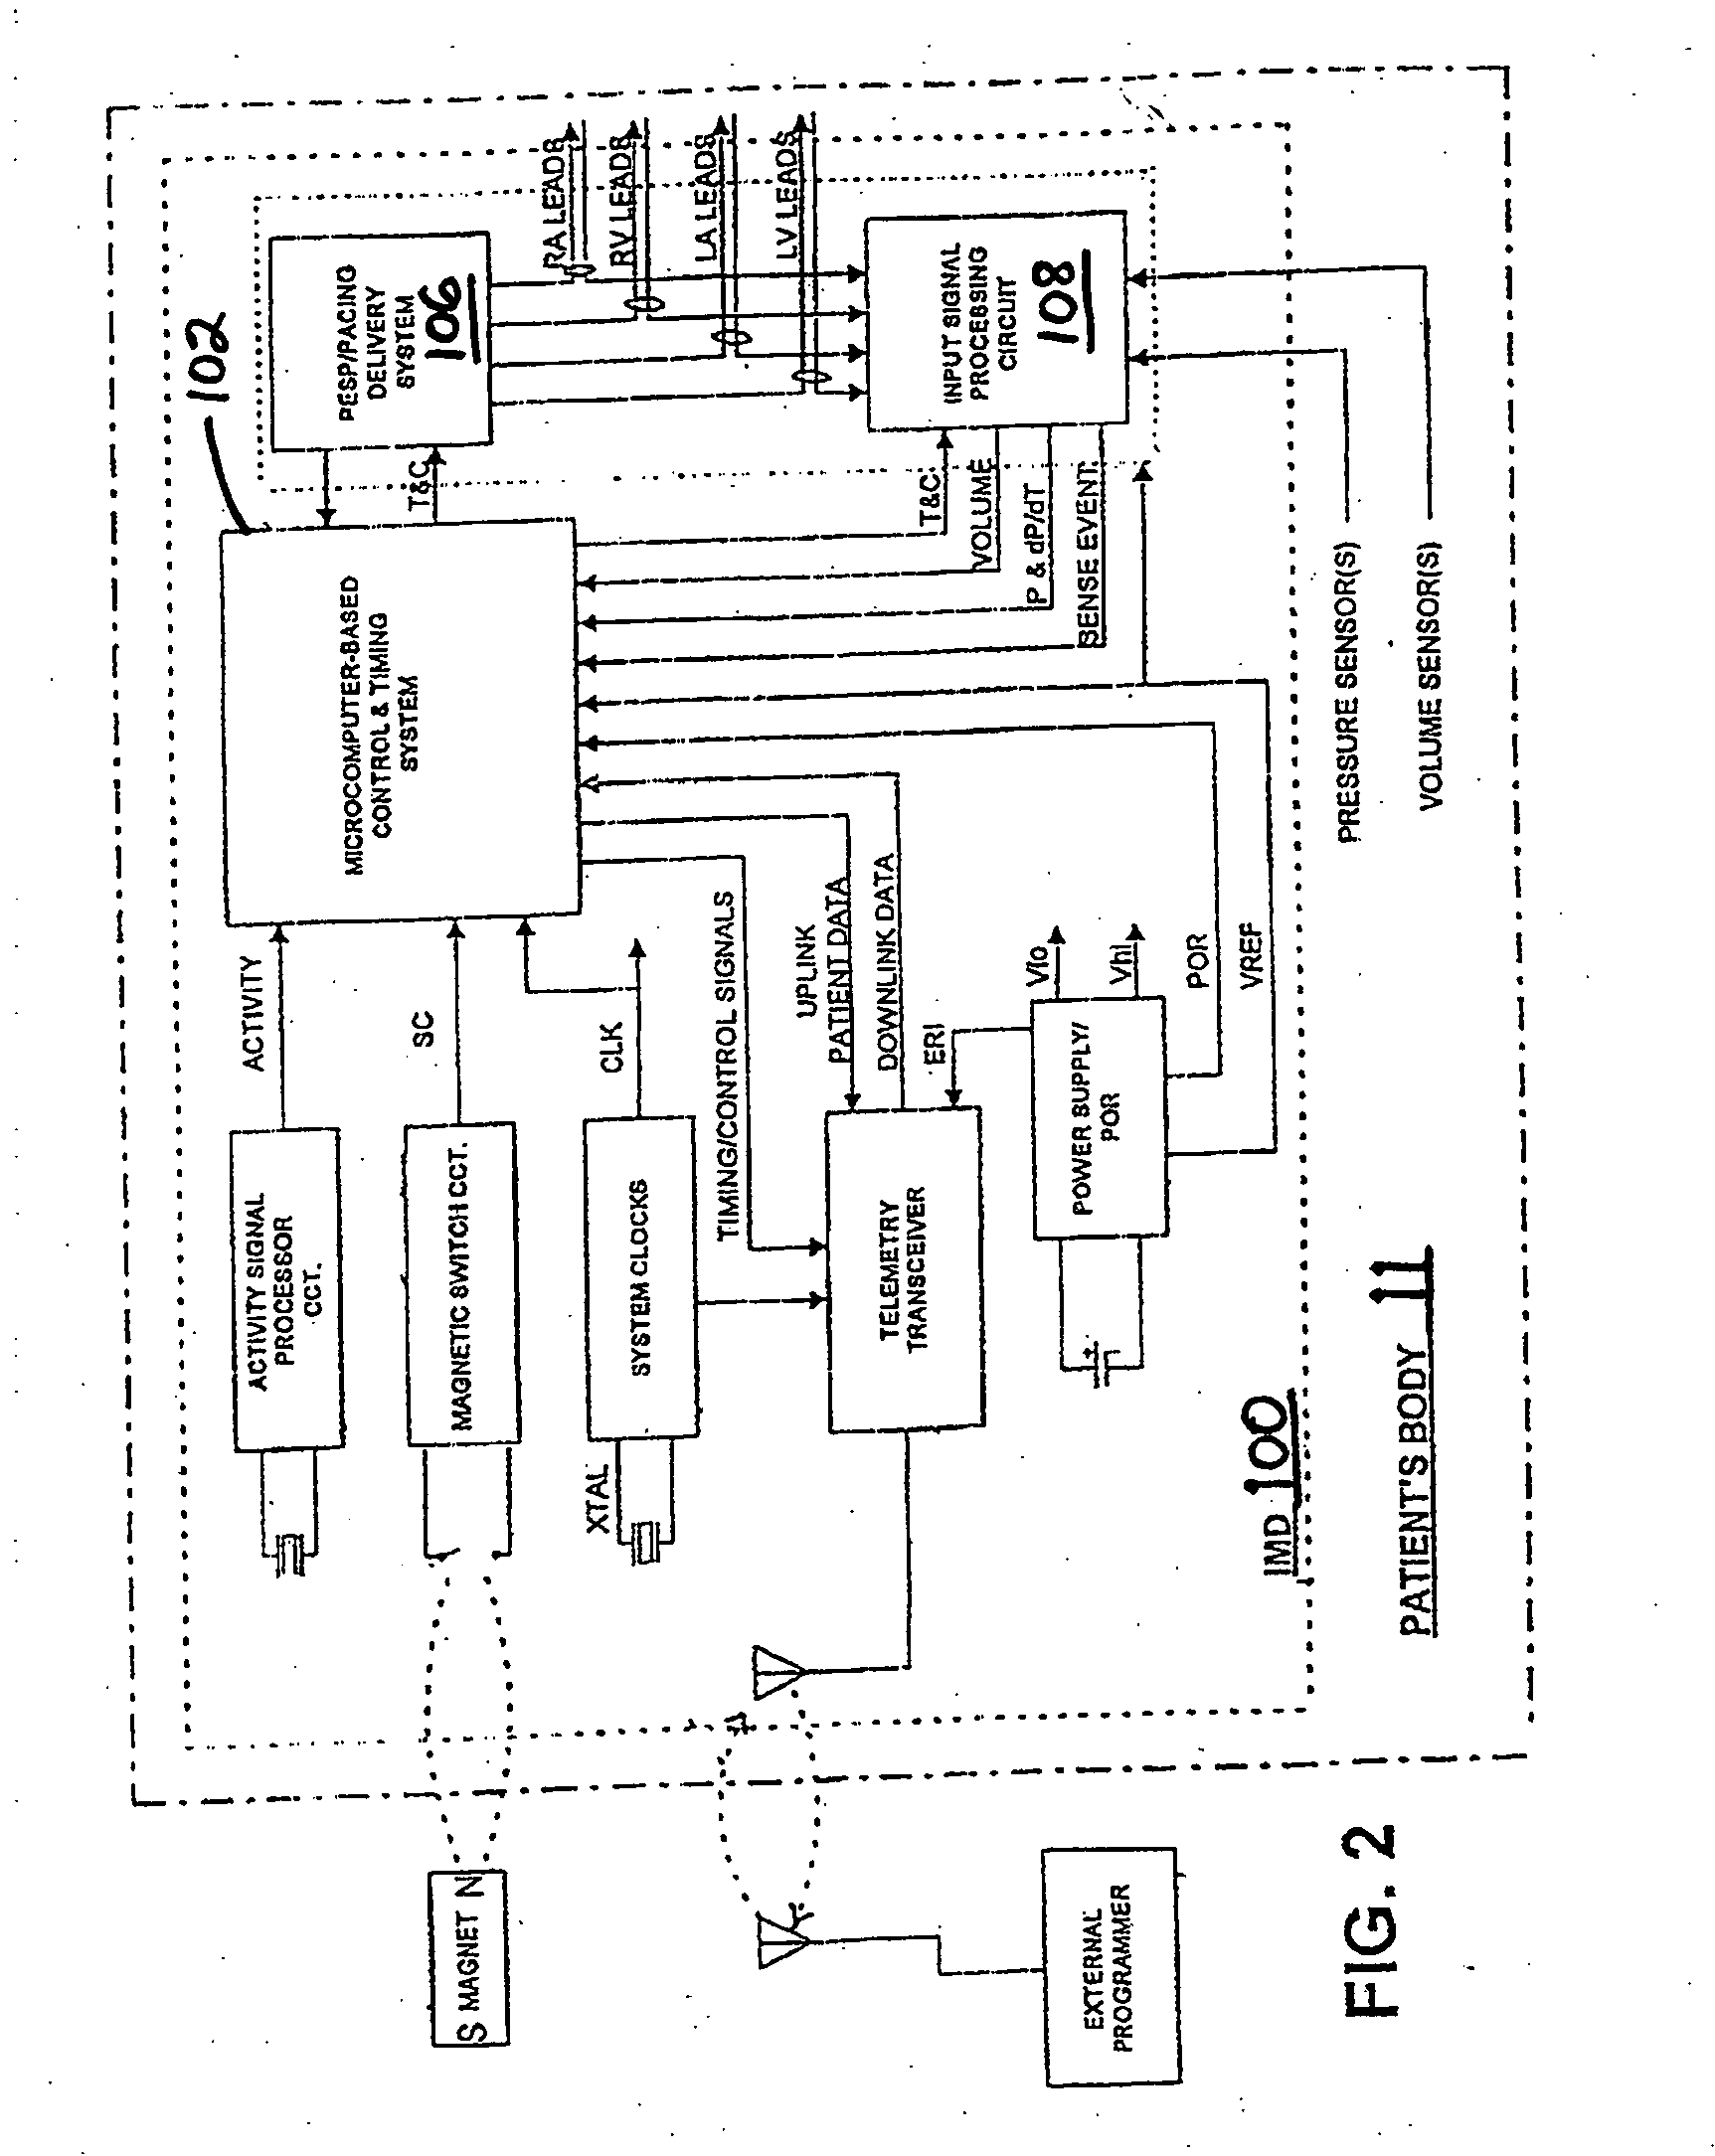 Method and system for controlling pulmonary capillary pressure